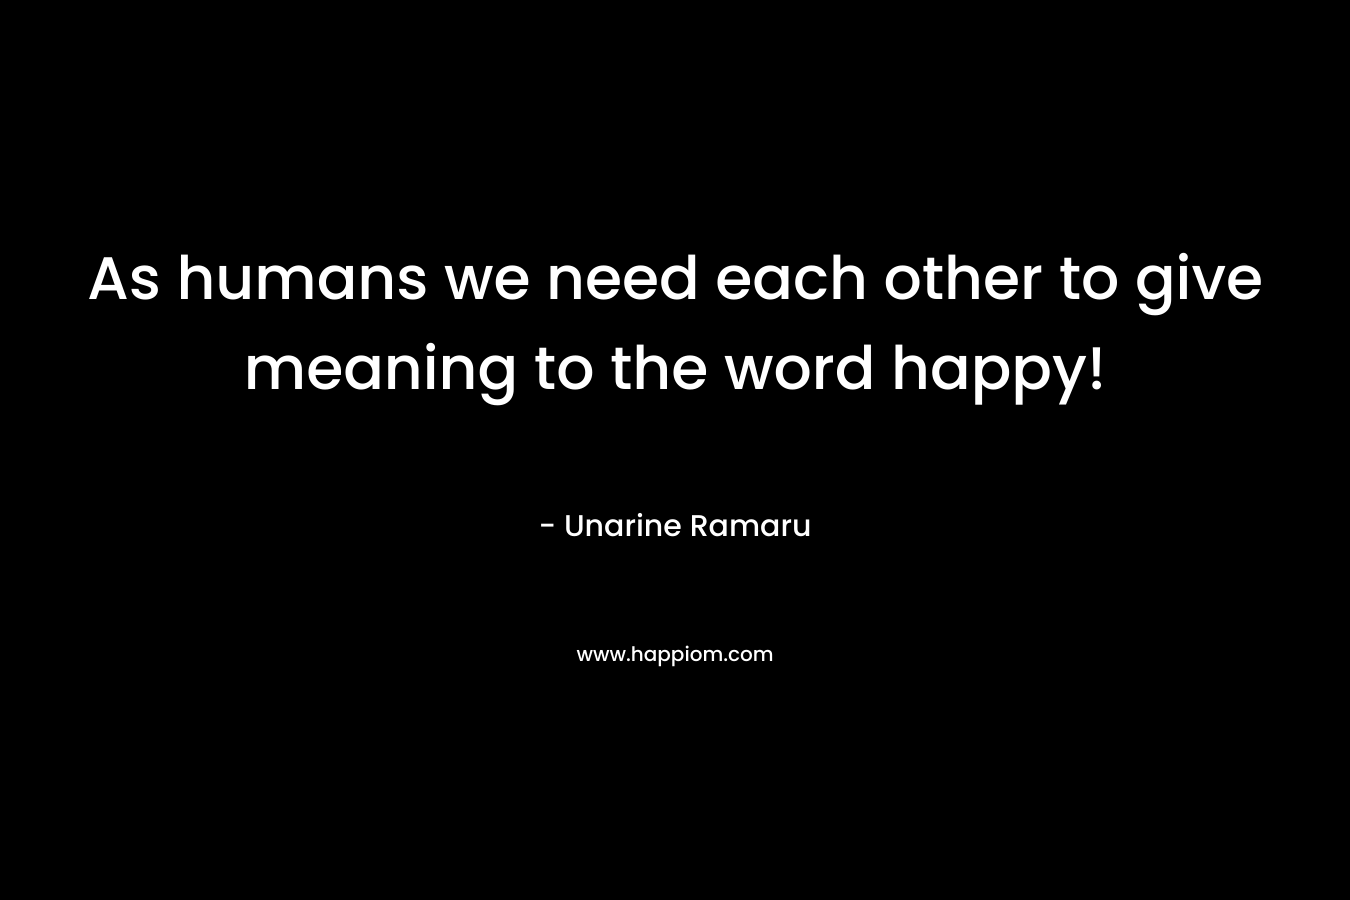 As humans we need each other to give meaning to the word happy!